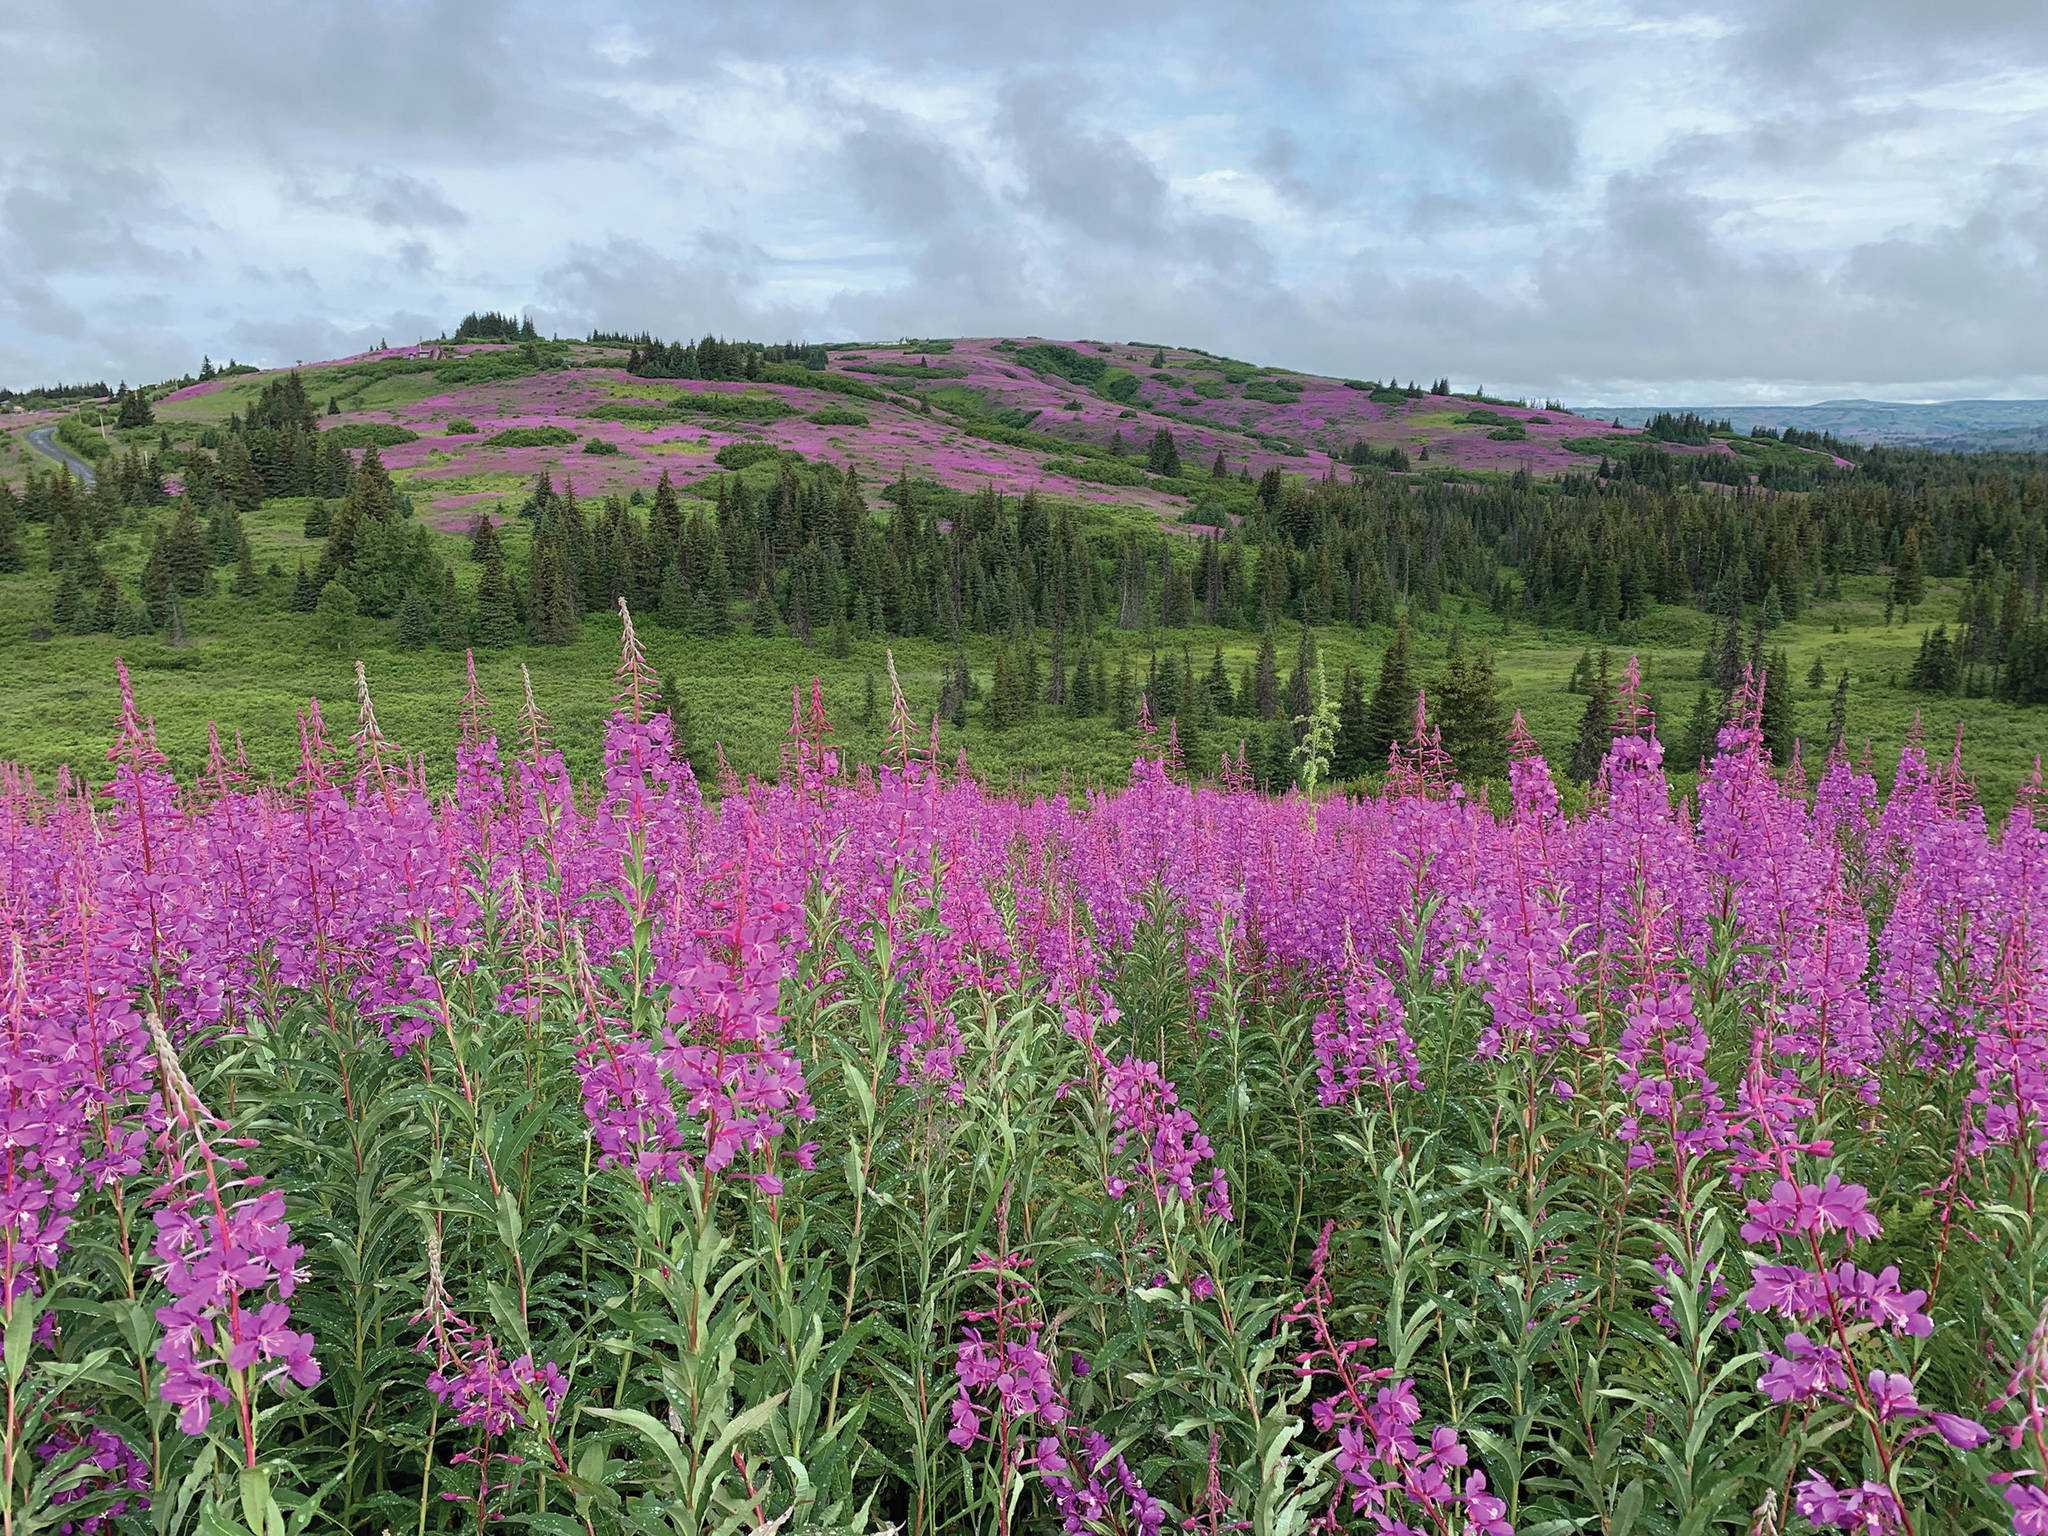 Fields of fireweed bloom in this undated photo of Inspiration Ridge overlooking the upper Fritz Creek watershed near Homer, Alaska. (Photo courtesy Nina Faust)